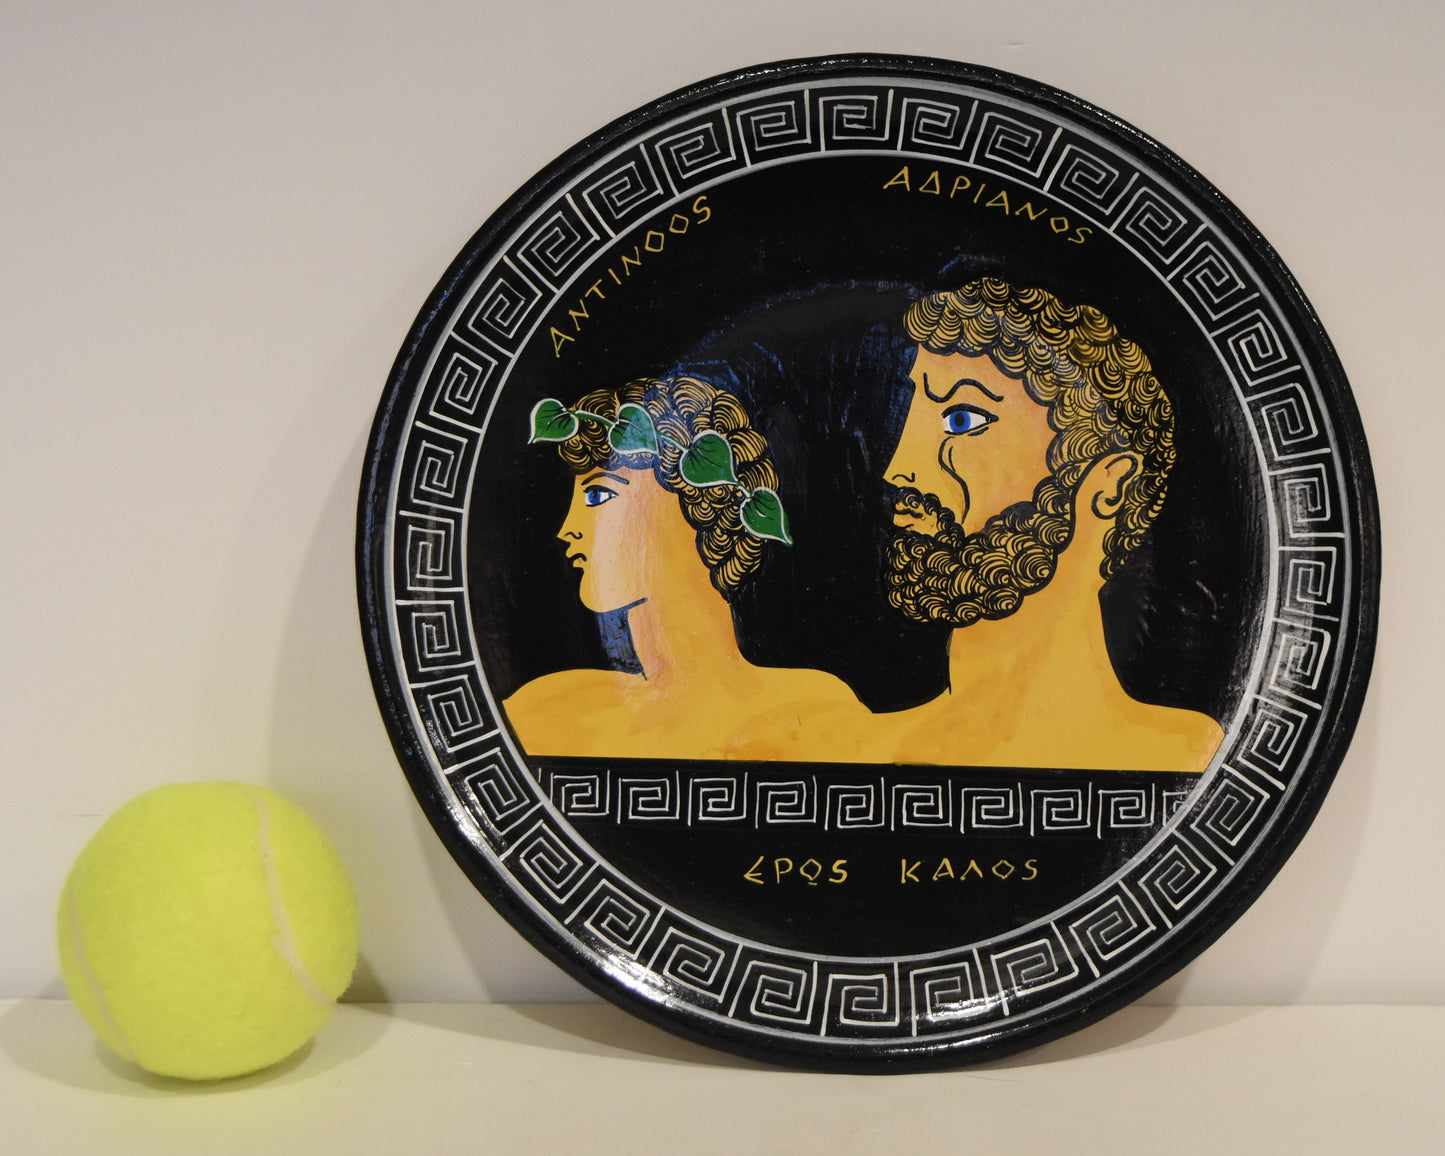 Antinous and Hadrian - An Ancient Love Story over the Centuries - Classic Period,500 BC - Meander Motif - Ceramic plate - Handmade in Greece